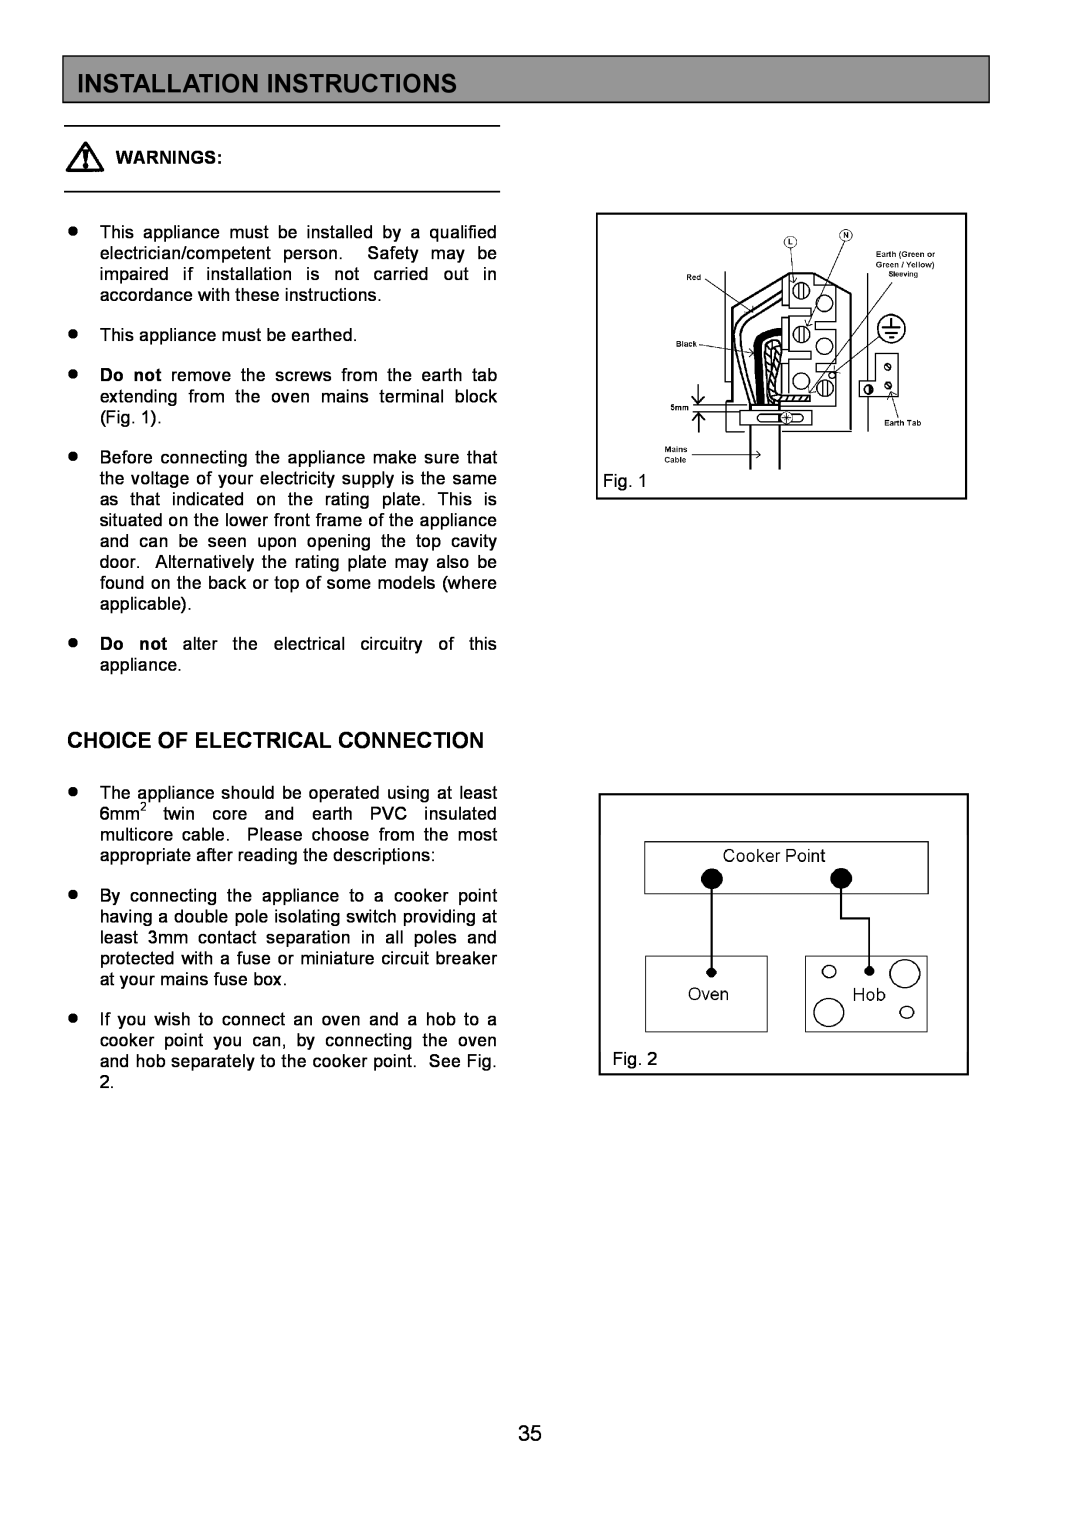 Zanussi ZHF865 manual Installation Instructions, Choice Of Electrical Connection, Warnings 